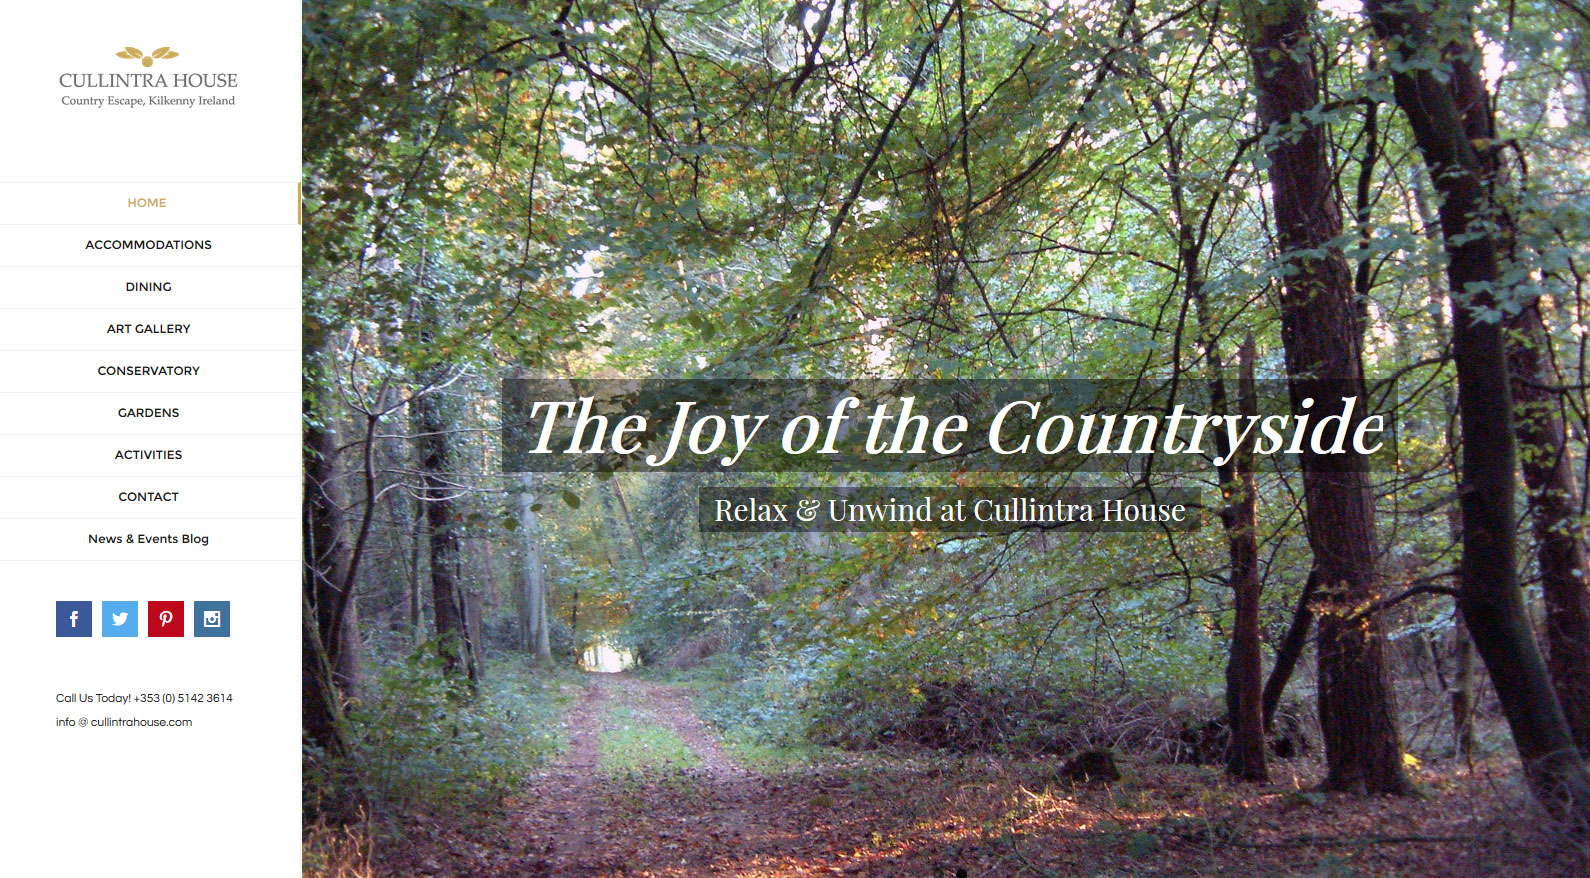 The Joy of Countryside - spend a few days at Cullintra House, Country Farmhouse Bed & Breakfast close to Kilkenny, Ireland